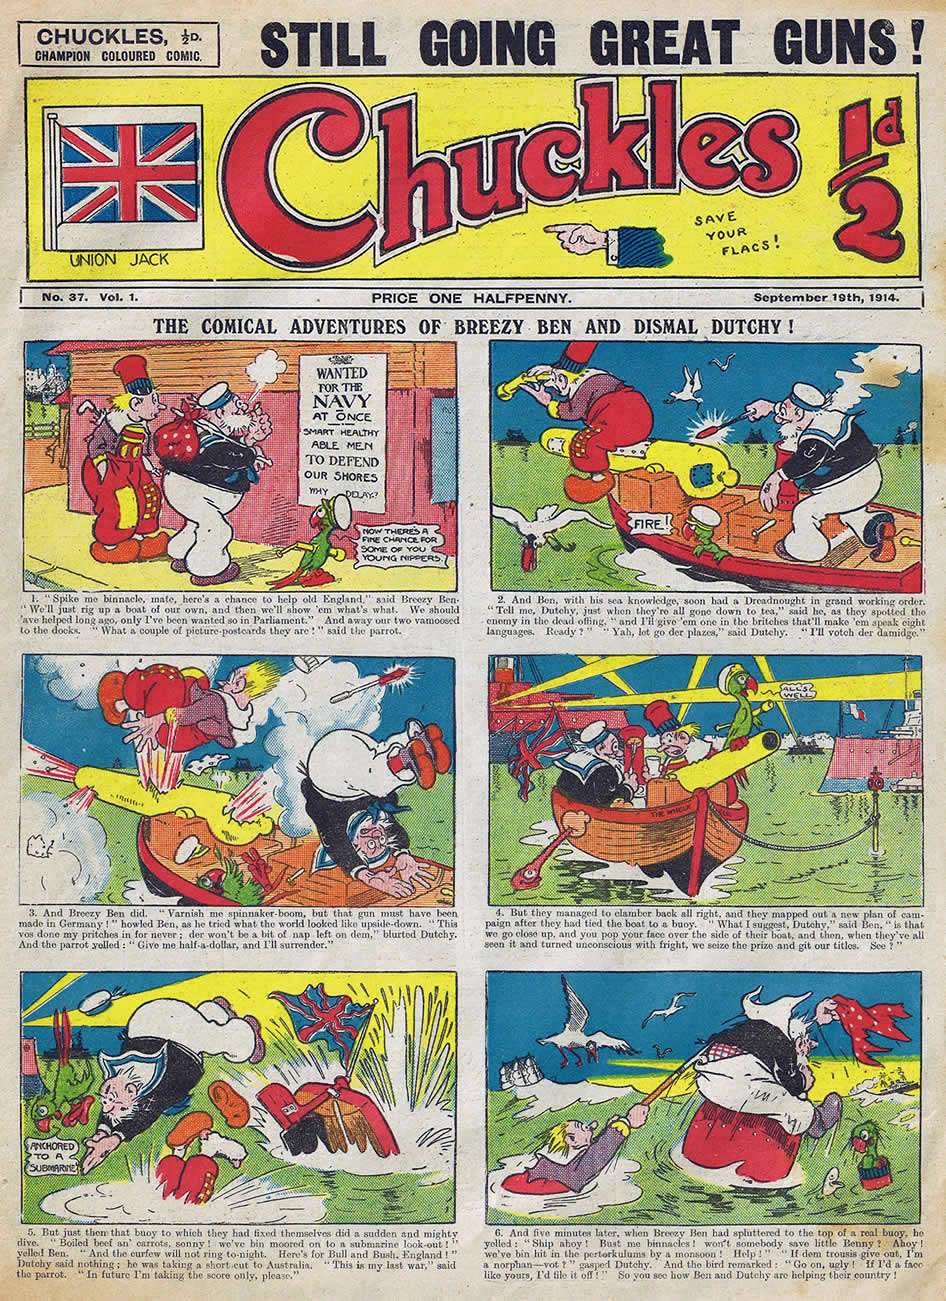 Chuckles Comic Issue 37